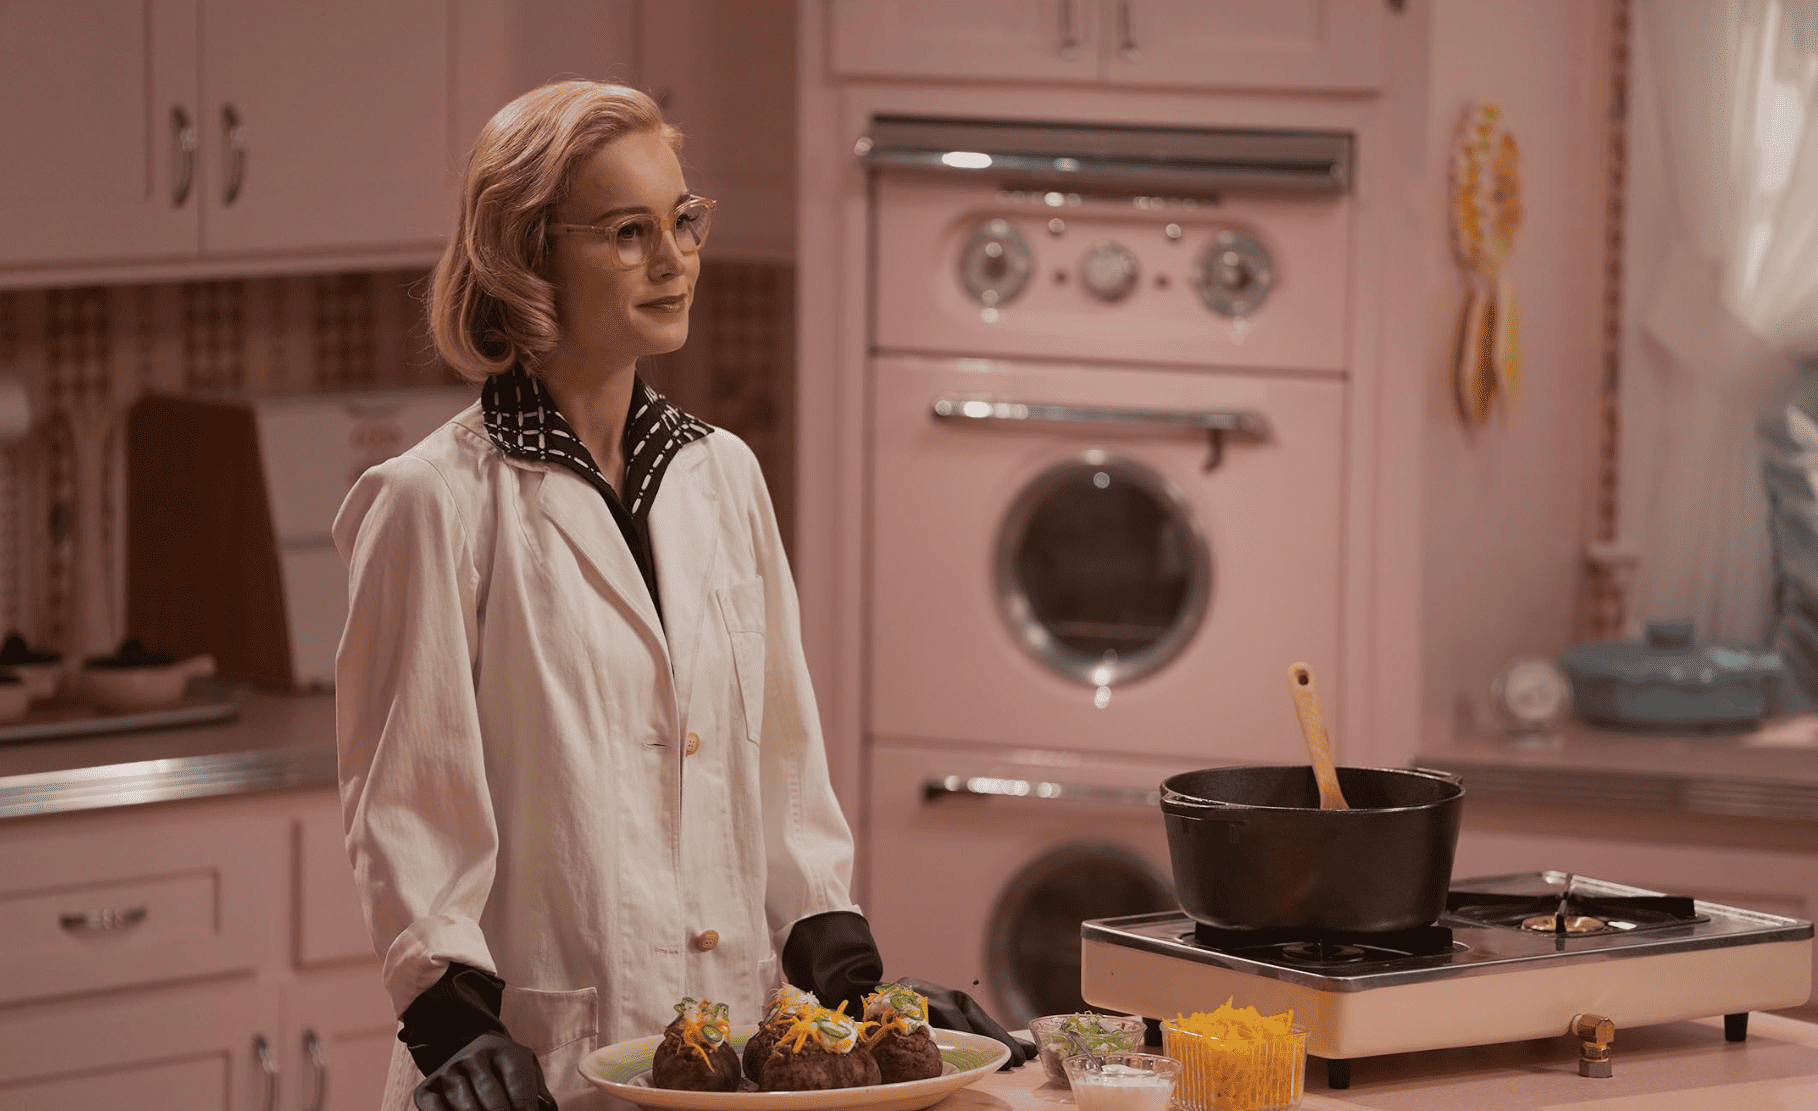 A woman in a lab coat makes dinner in this image from The Great Unknown Productions.